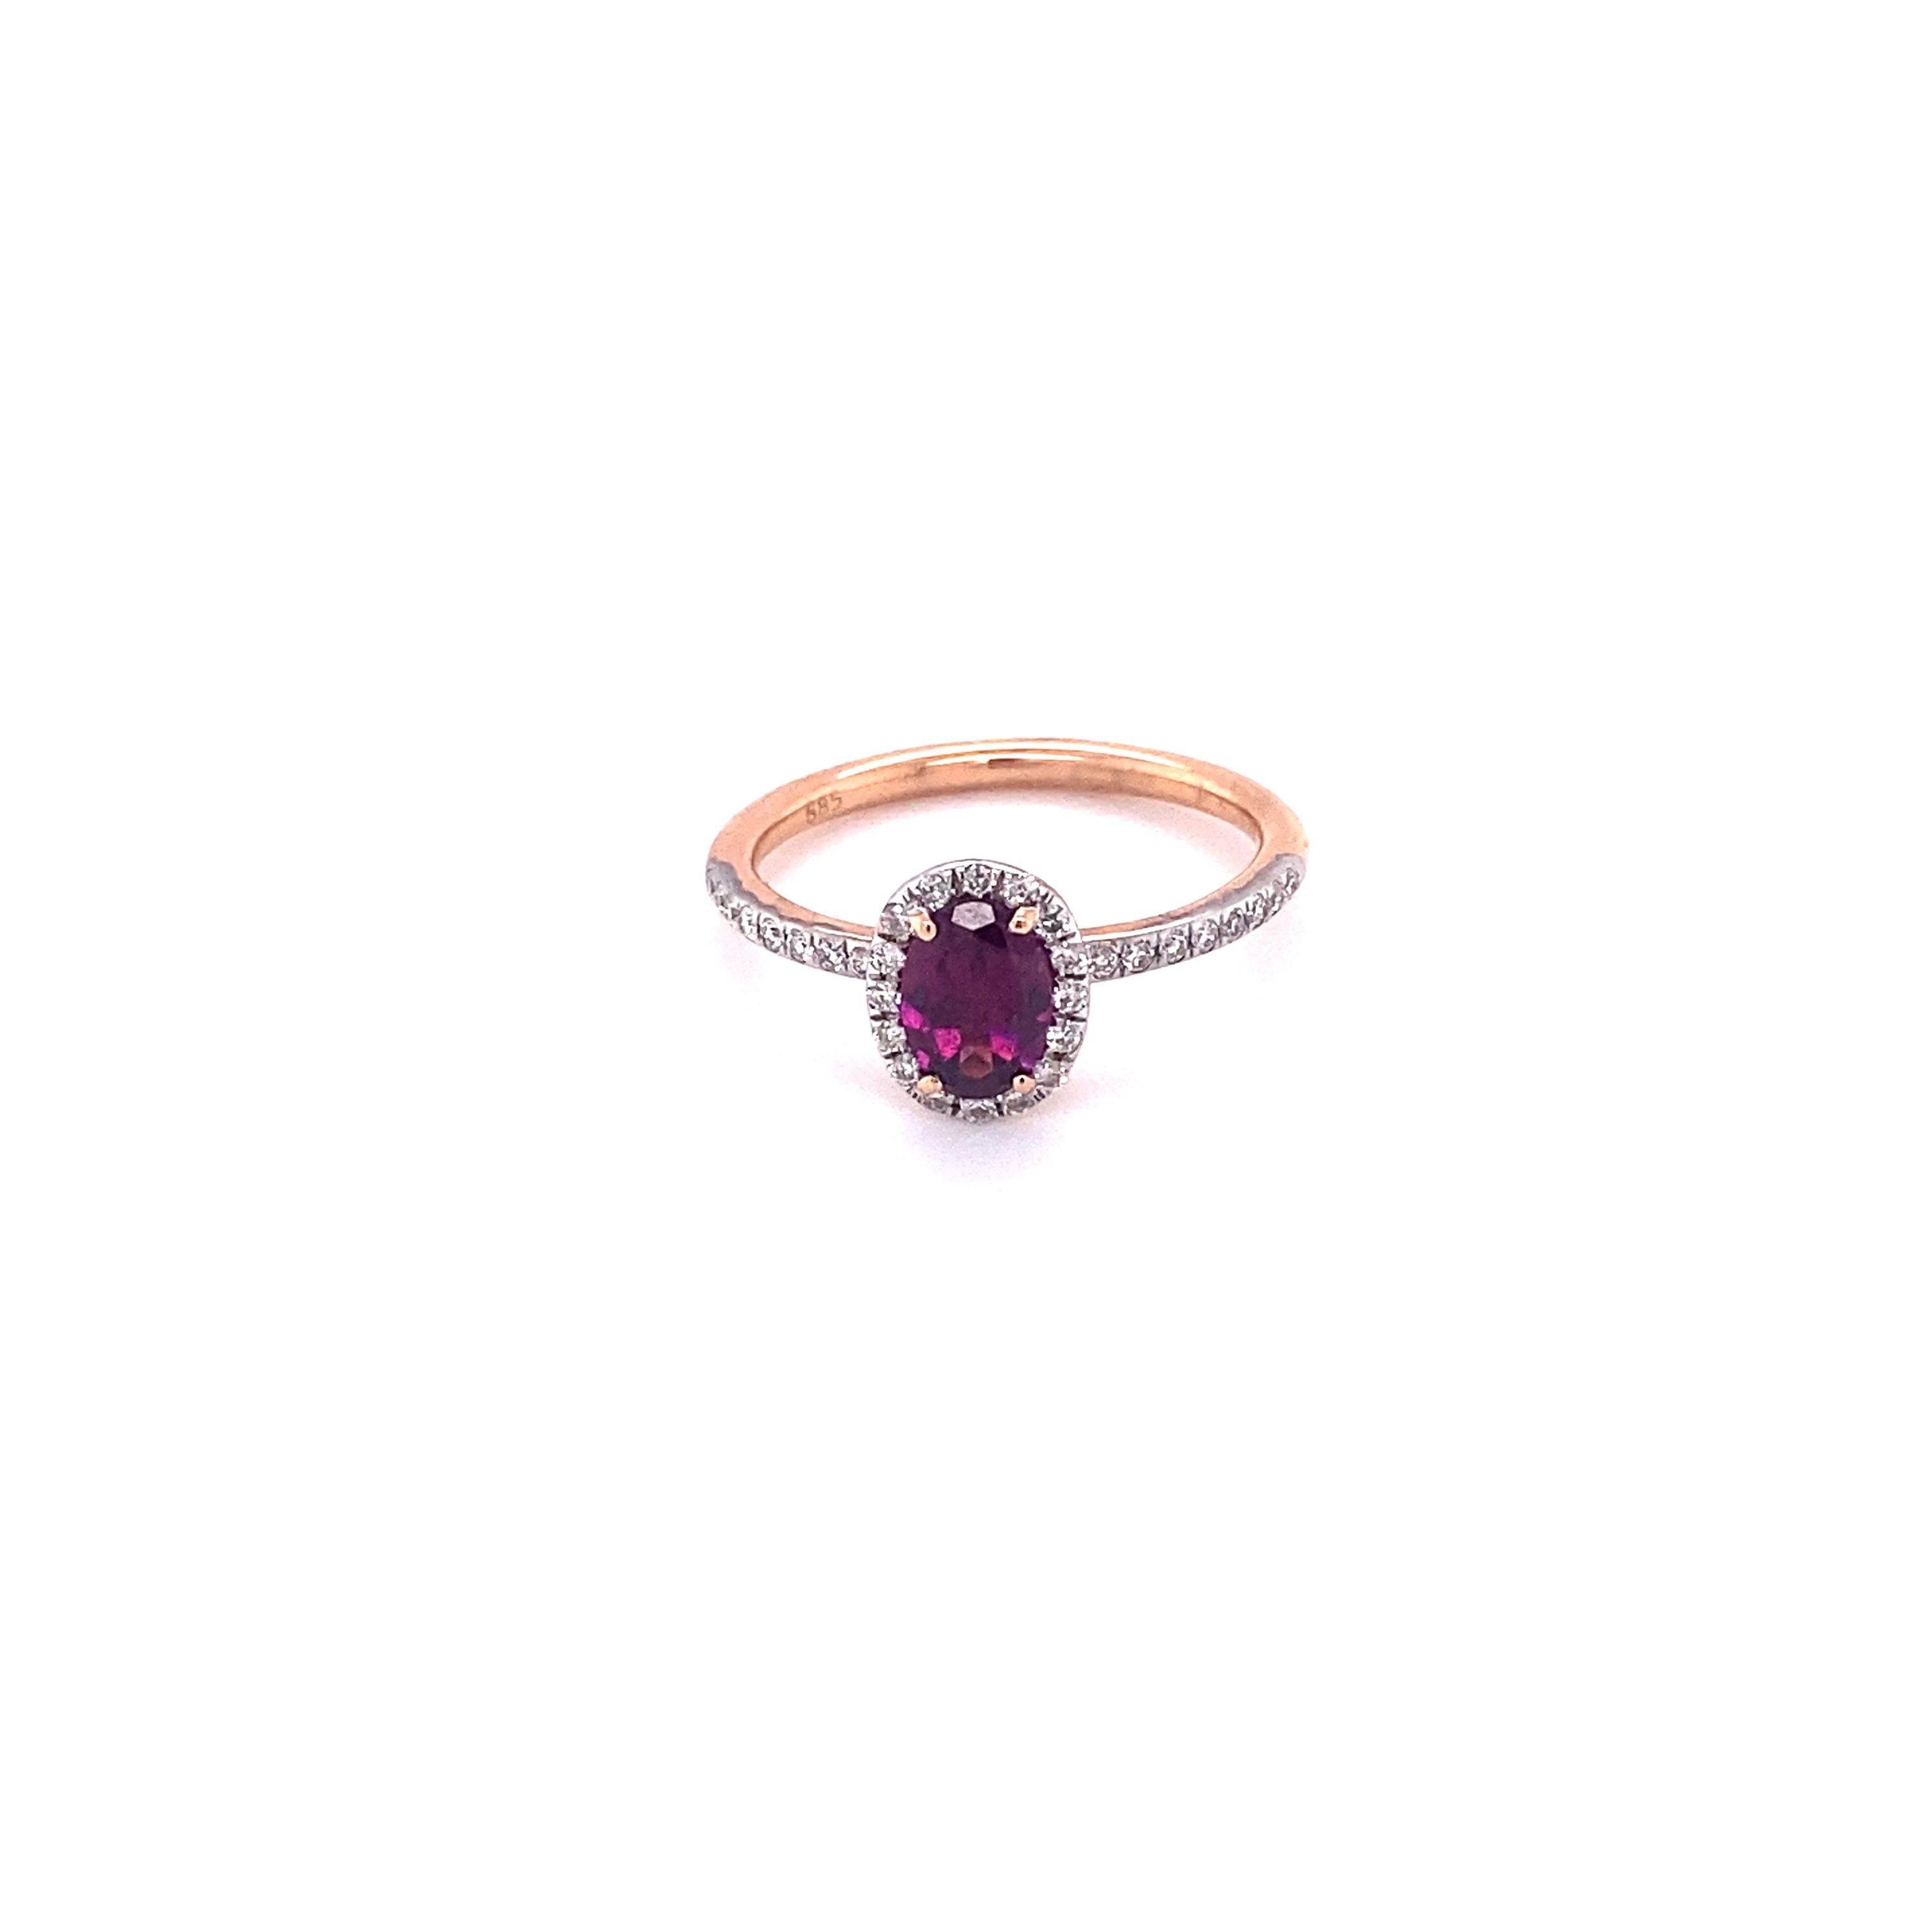 For Sale:  Gemstone Solitaire Ring Stack, 14k Solid Gold Rings with Natural Round Diamonds 13